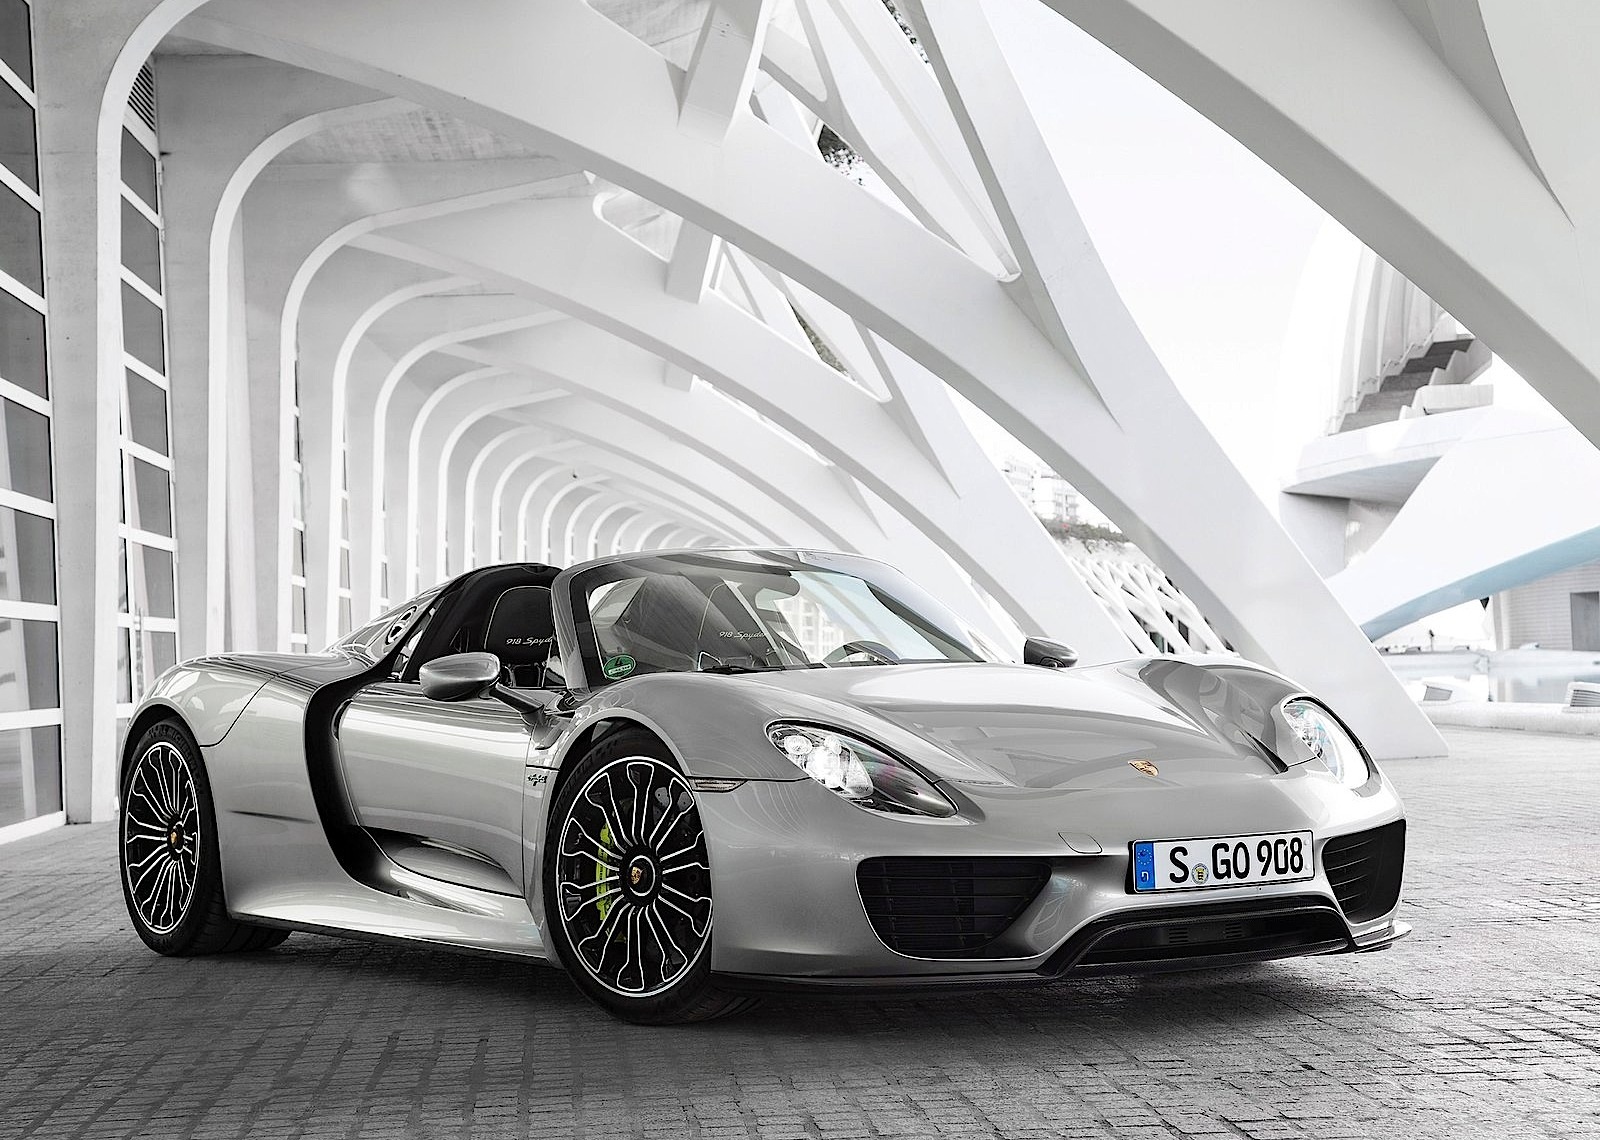 Porsche 918 Spyder Top 10 Fastest Accelerating Hybrid Cars from 0 - 60 MPH - 5